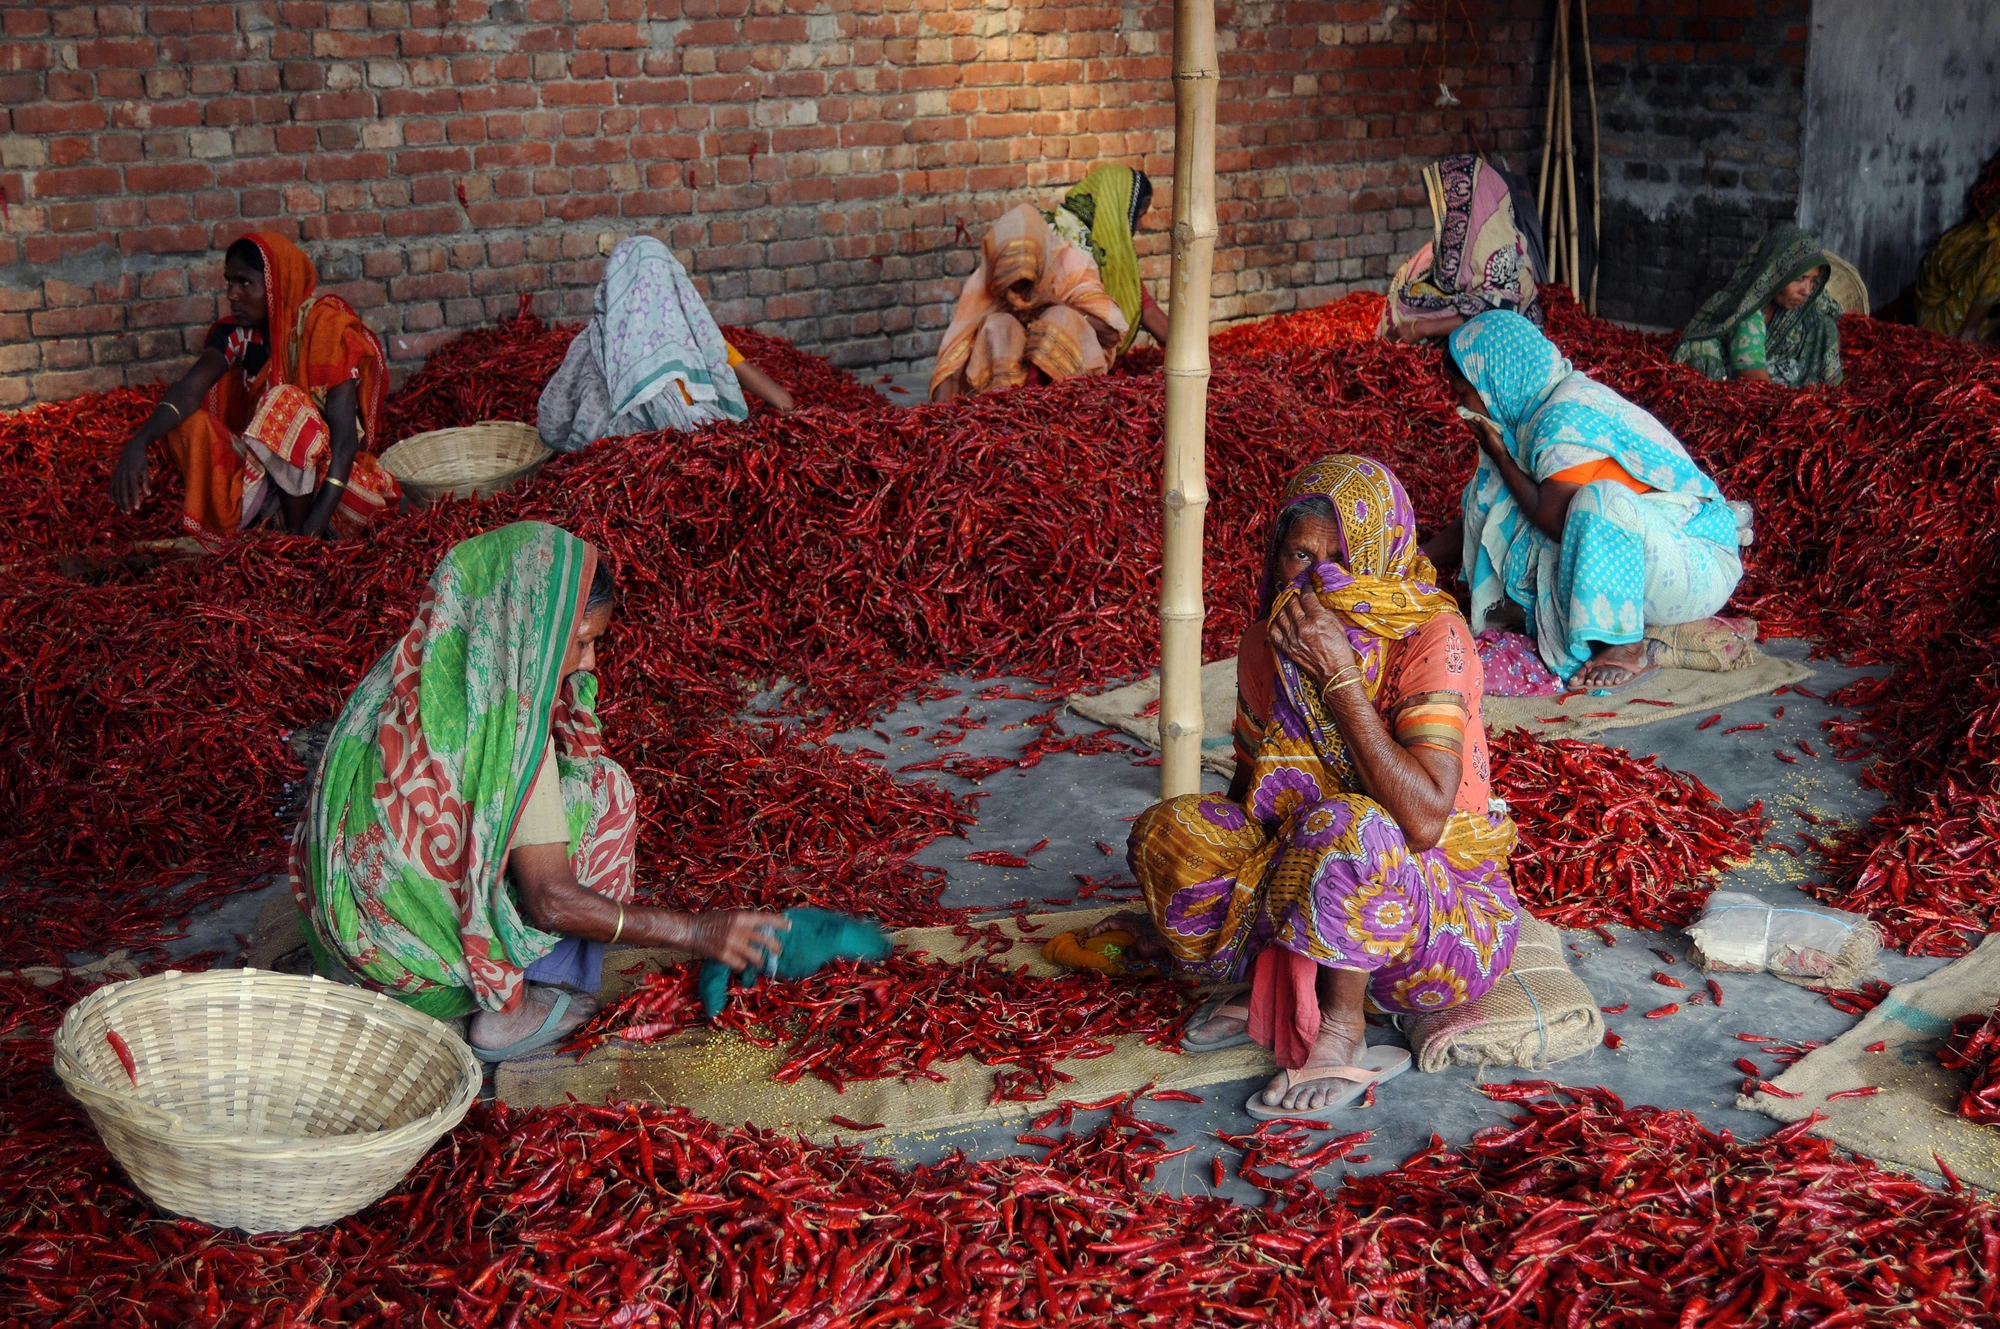 Women chili workers are busy working in chili field playin a great role in their family economy. Courtesy of Photoshare.